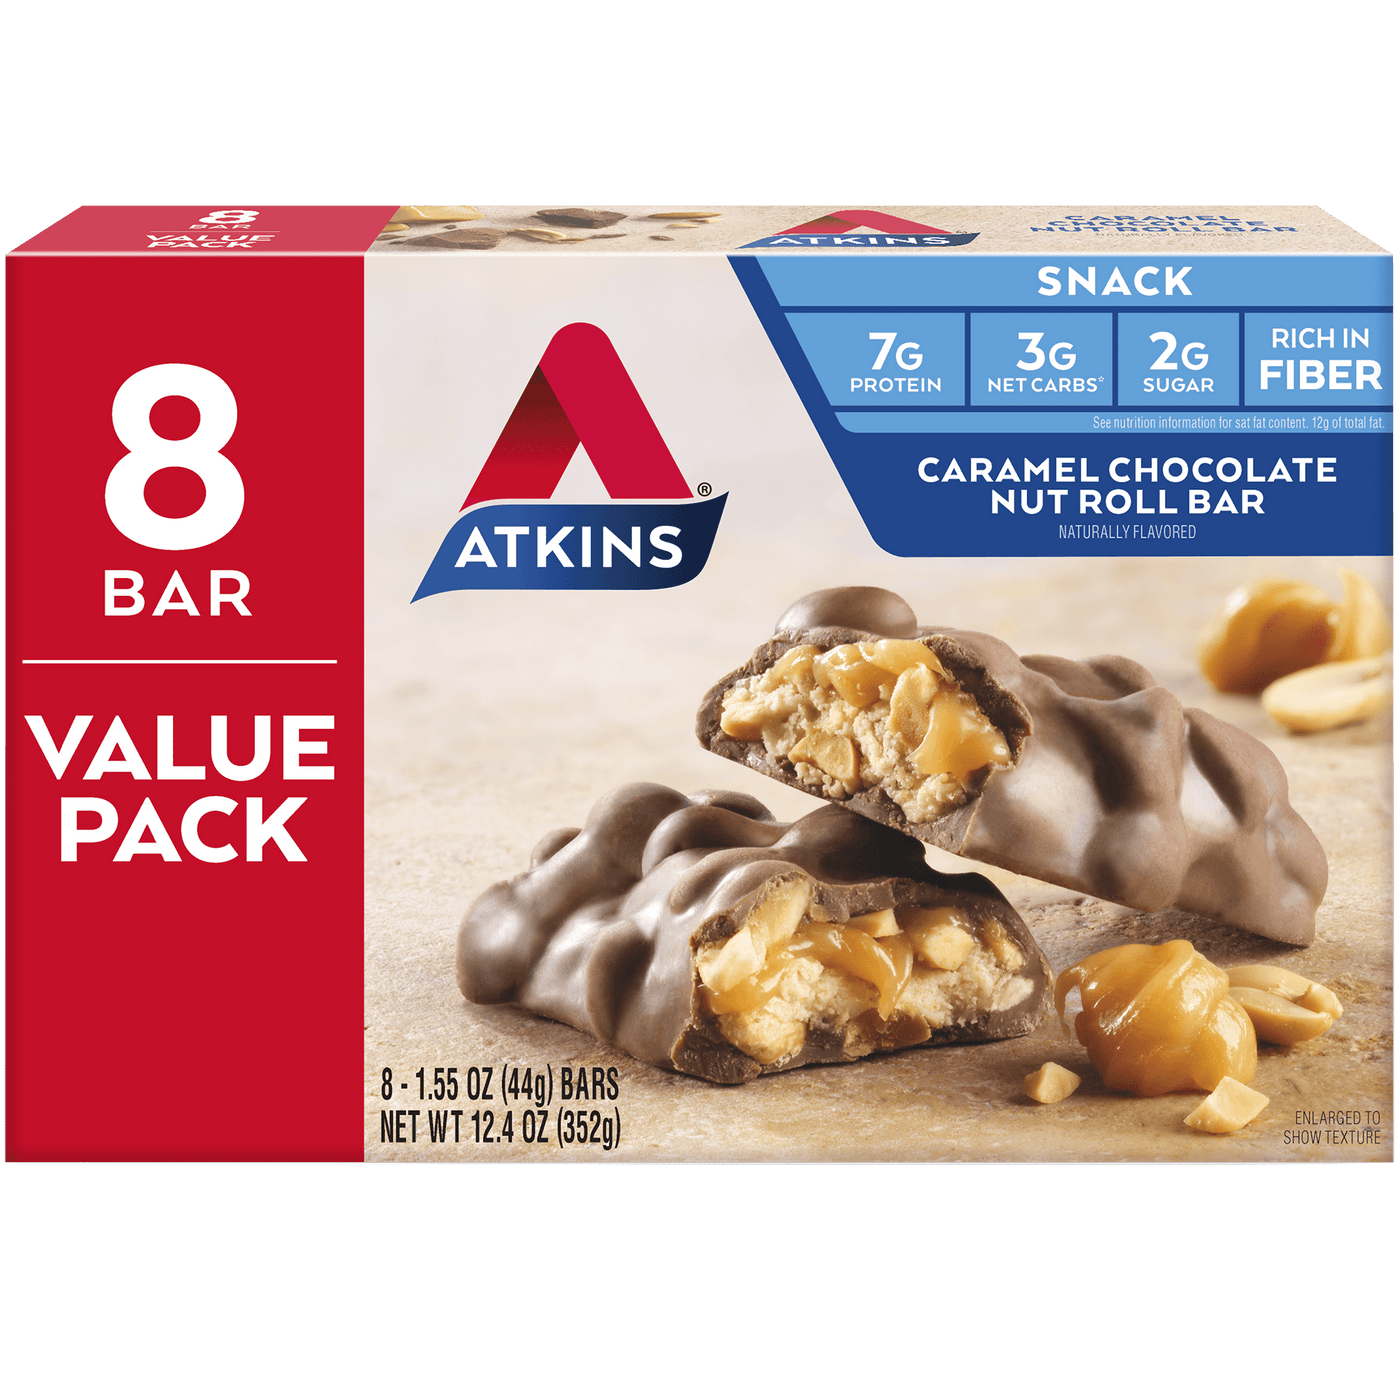 Caramel Chocolate Nut Roll Value Pack